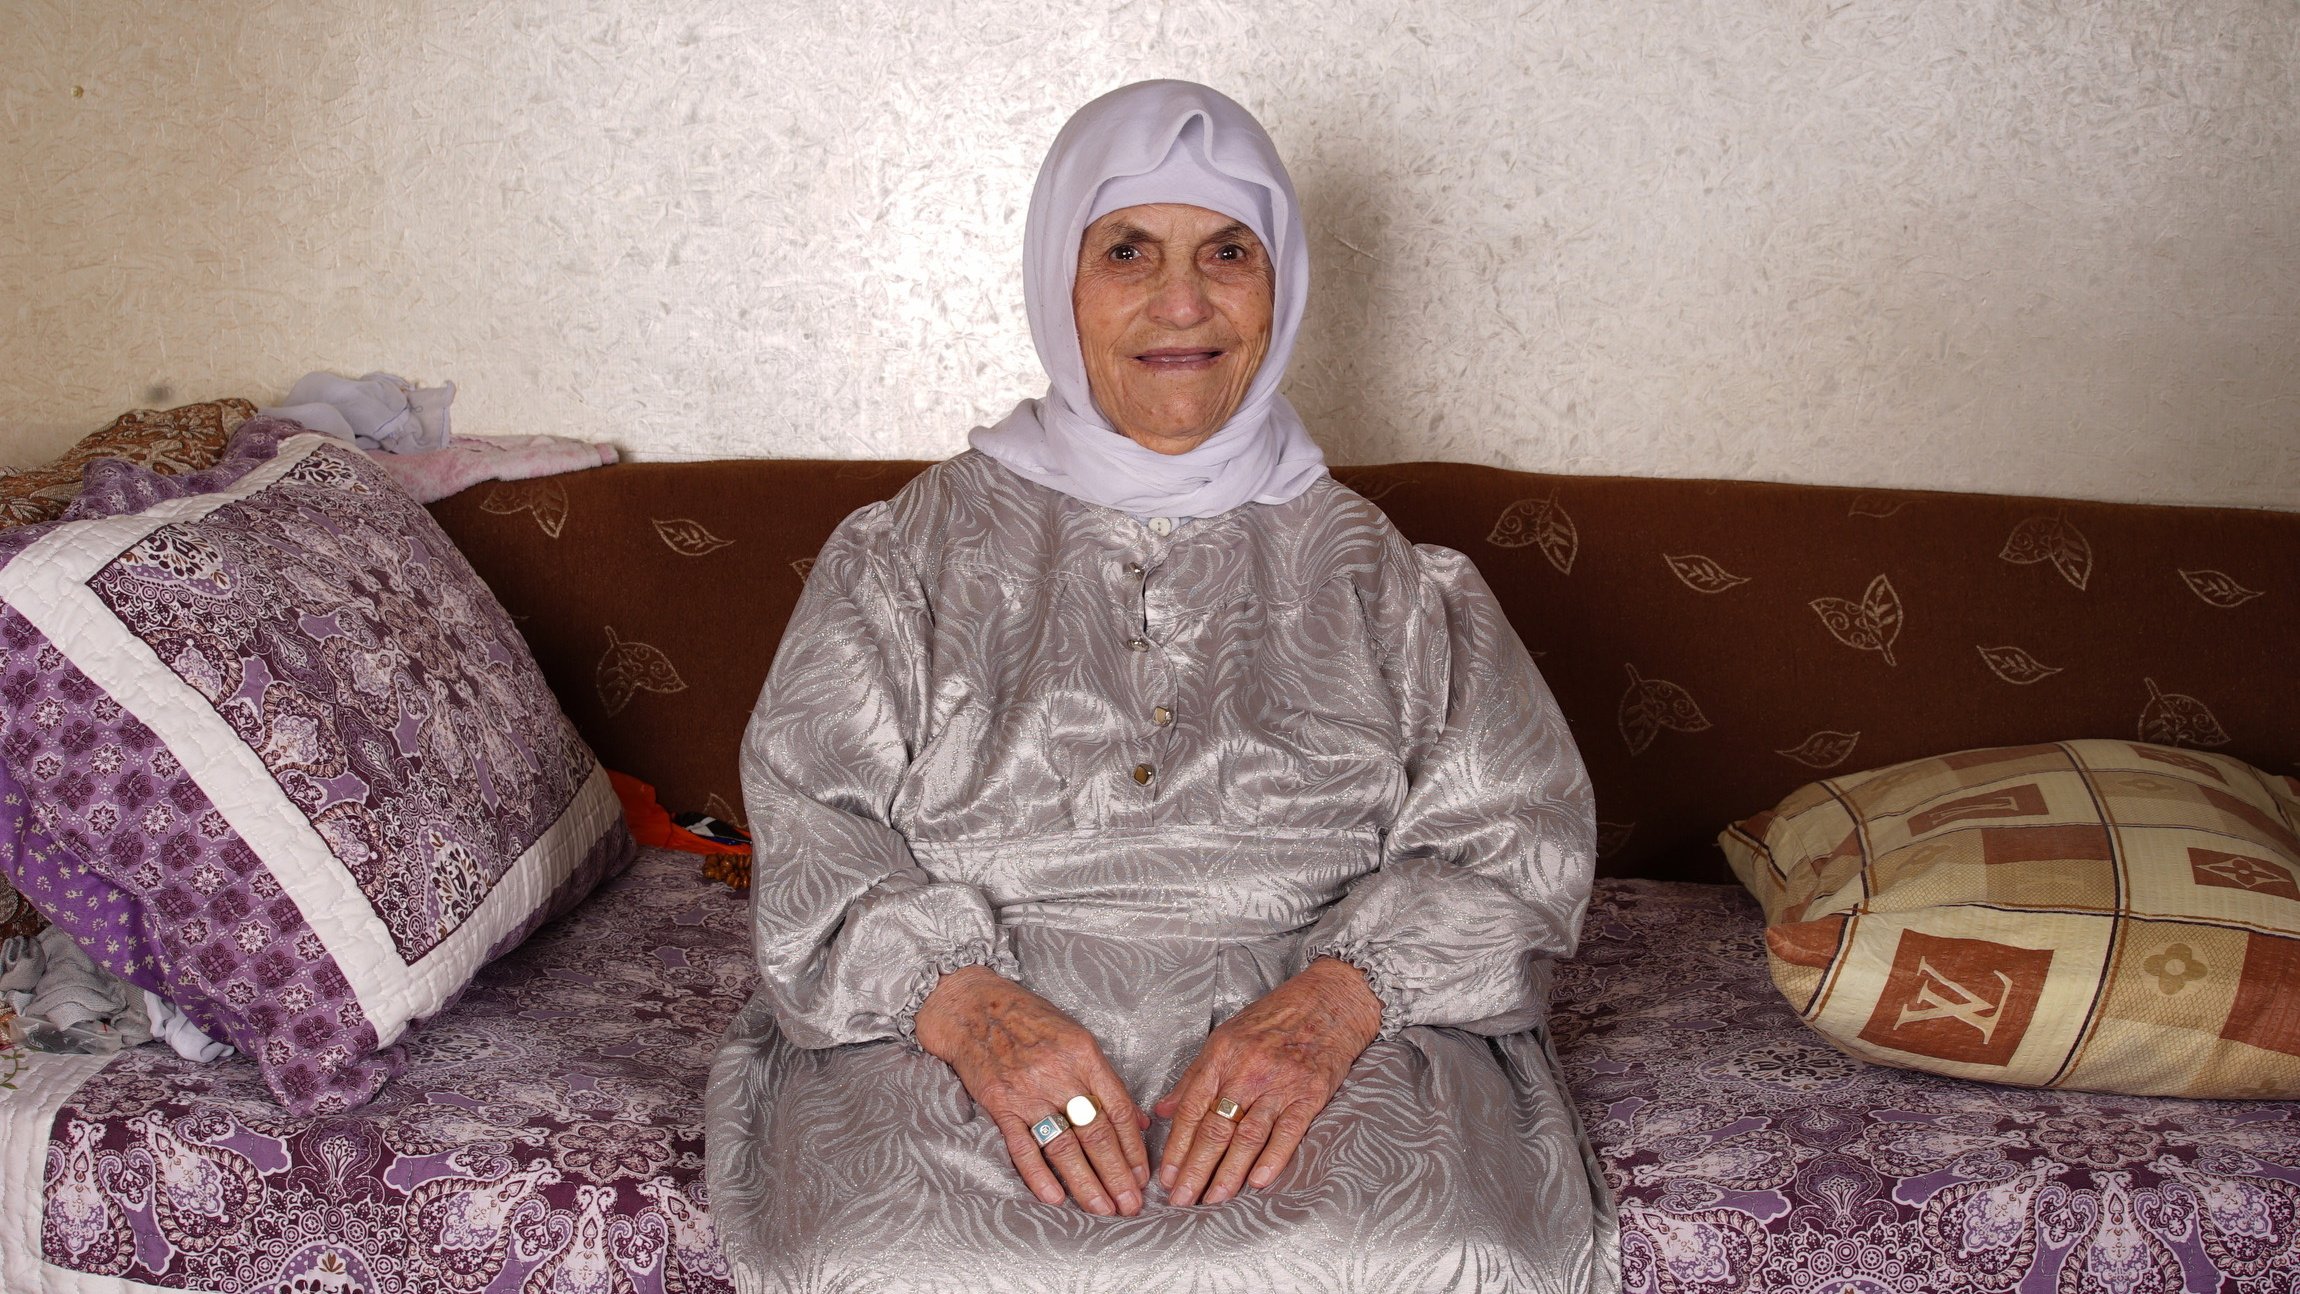 The author’s aunt, Otra Khatib, is pictured at her home (Safaa Khatib/Middle East Eye)